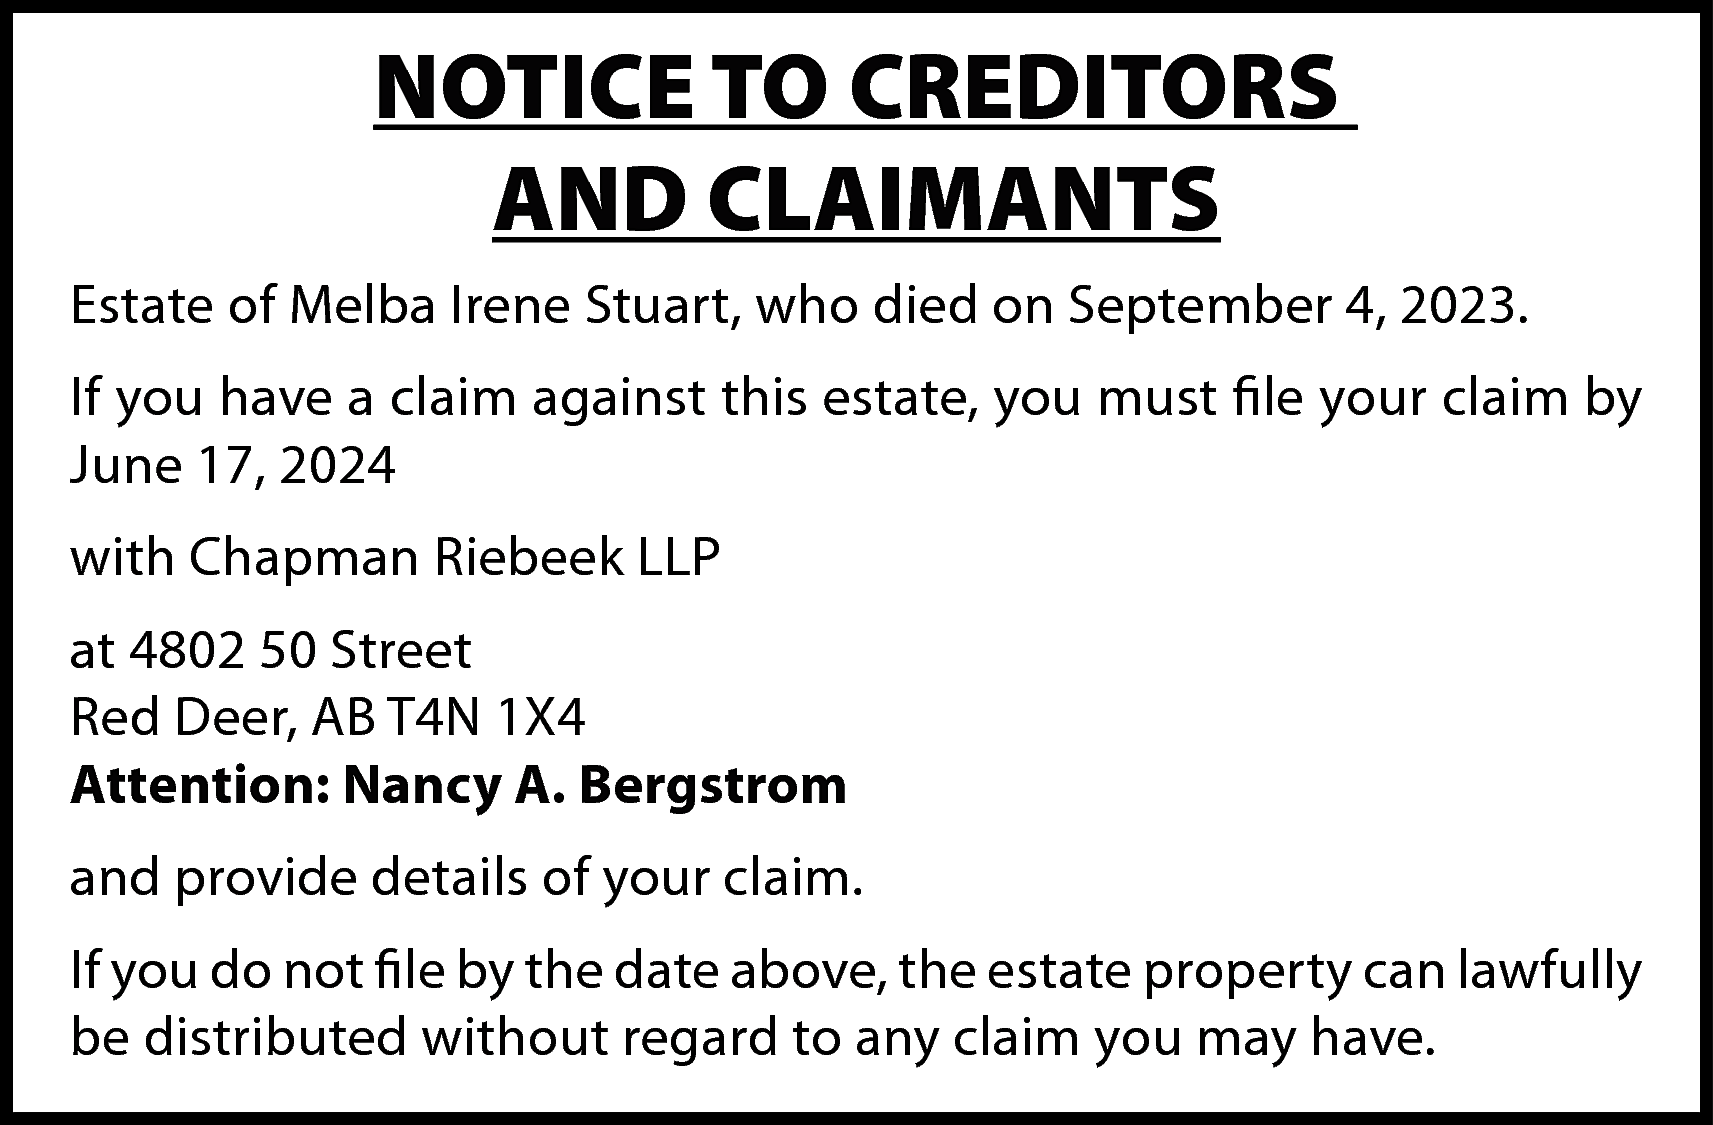 NOTICE TO CREDITORS <br>AND CLAIMANTS  NOTICE TO CREDITORS  AND CLAIMANTS  Estate of Melba Irene Stuart, who died on September 4, 2023.  If you have a claim against this estate, you must file your claim by  June 17, 2024  with Chapman Riebeek LLP  at 4802 50 Street  Red Deer, AB T4N 1X4  Attention: Nancy A. Bergstrom  and provide details of your claim.  If you do not file by the date above, the estate property can lawfully  be distributed without regard to any claim you may have.    